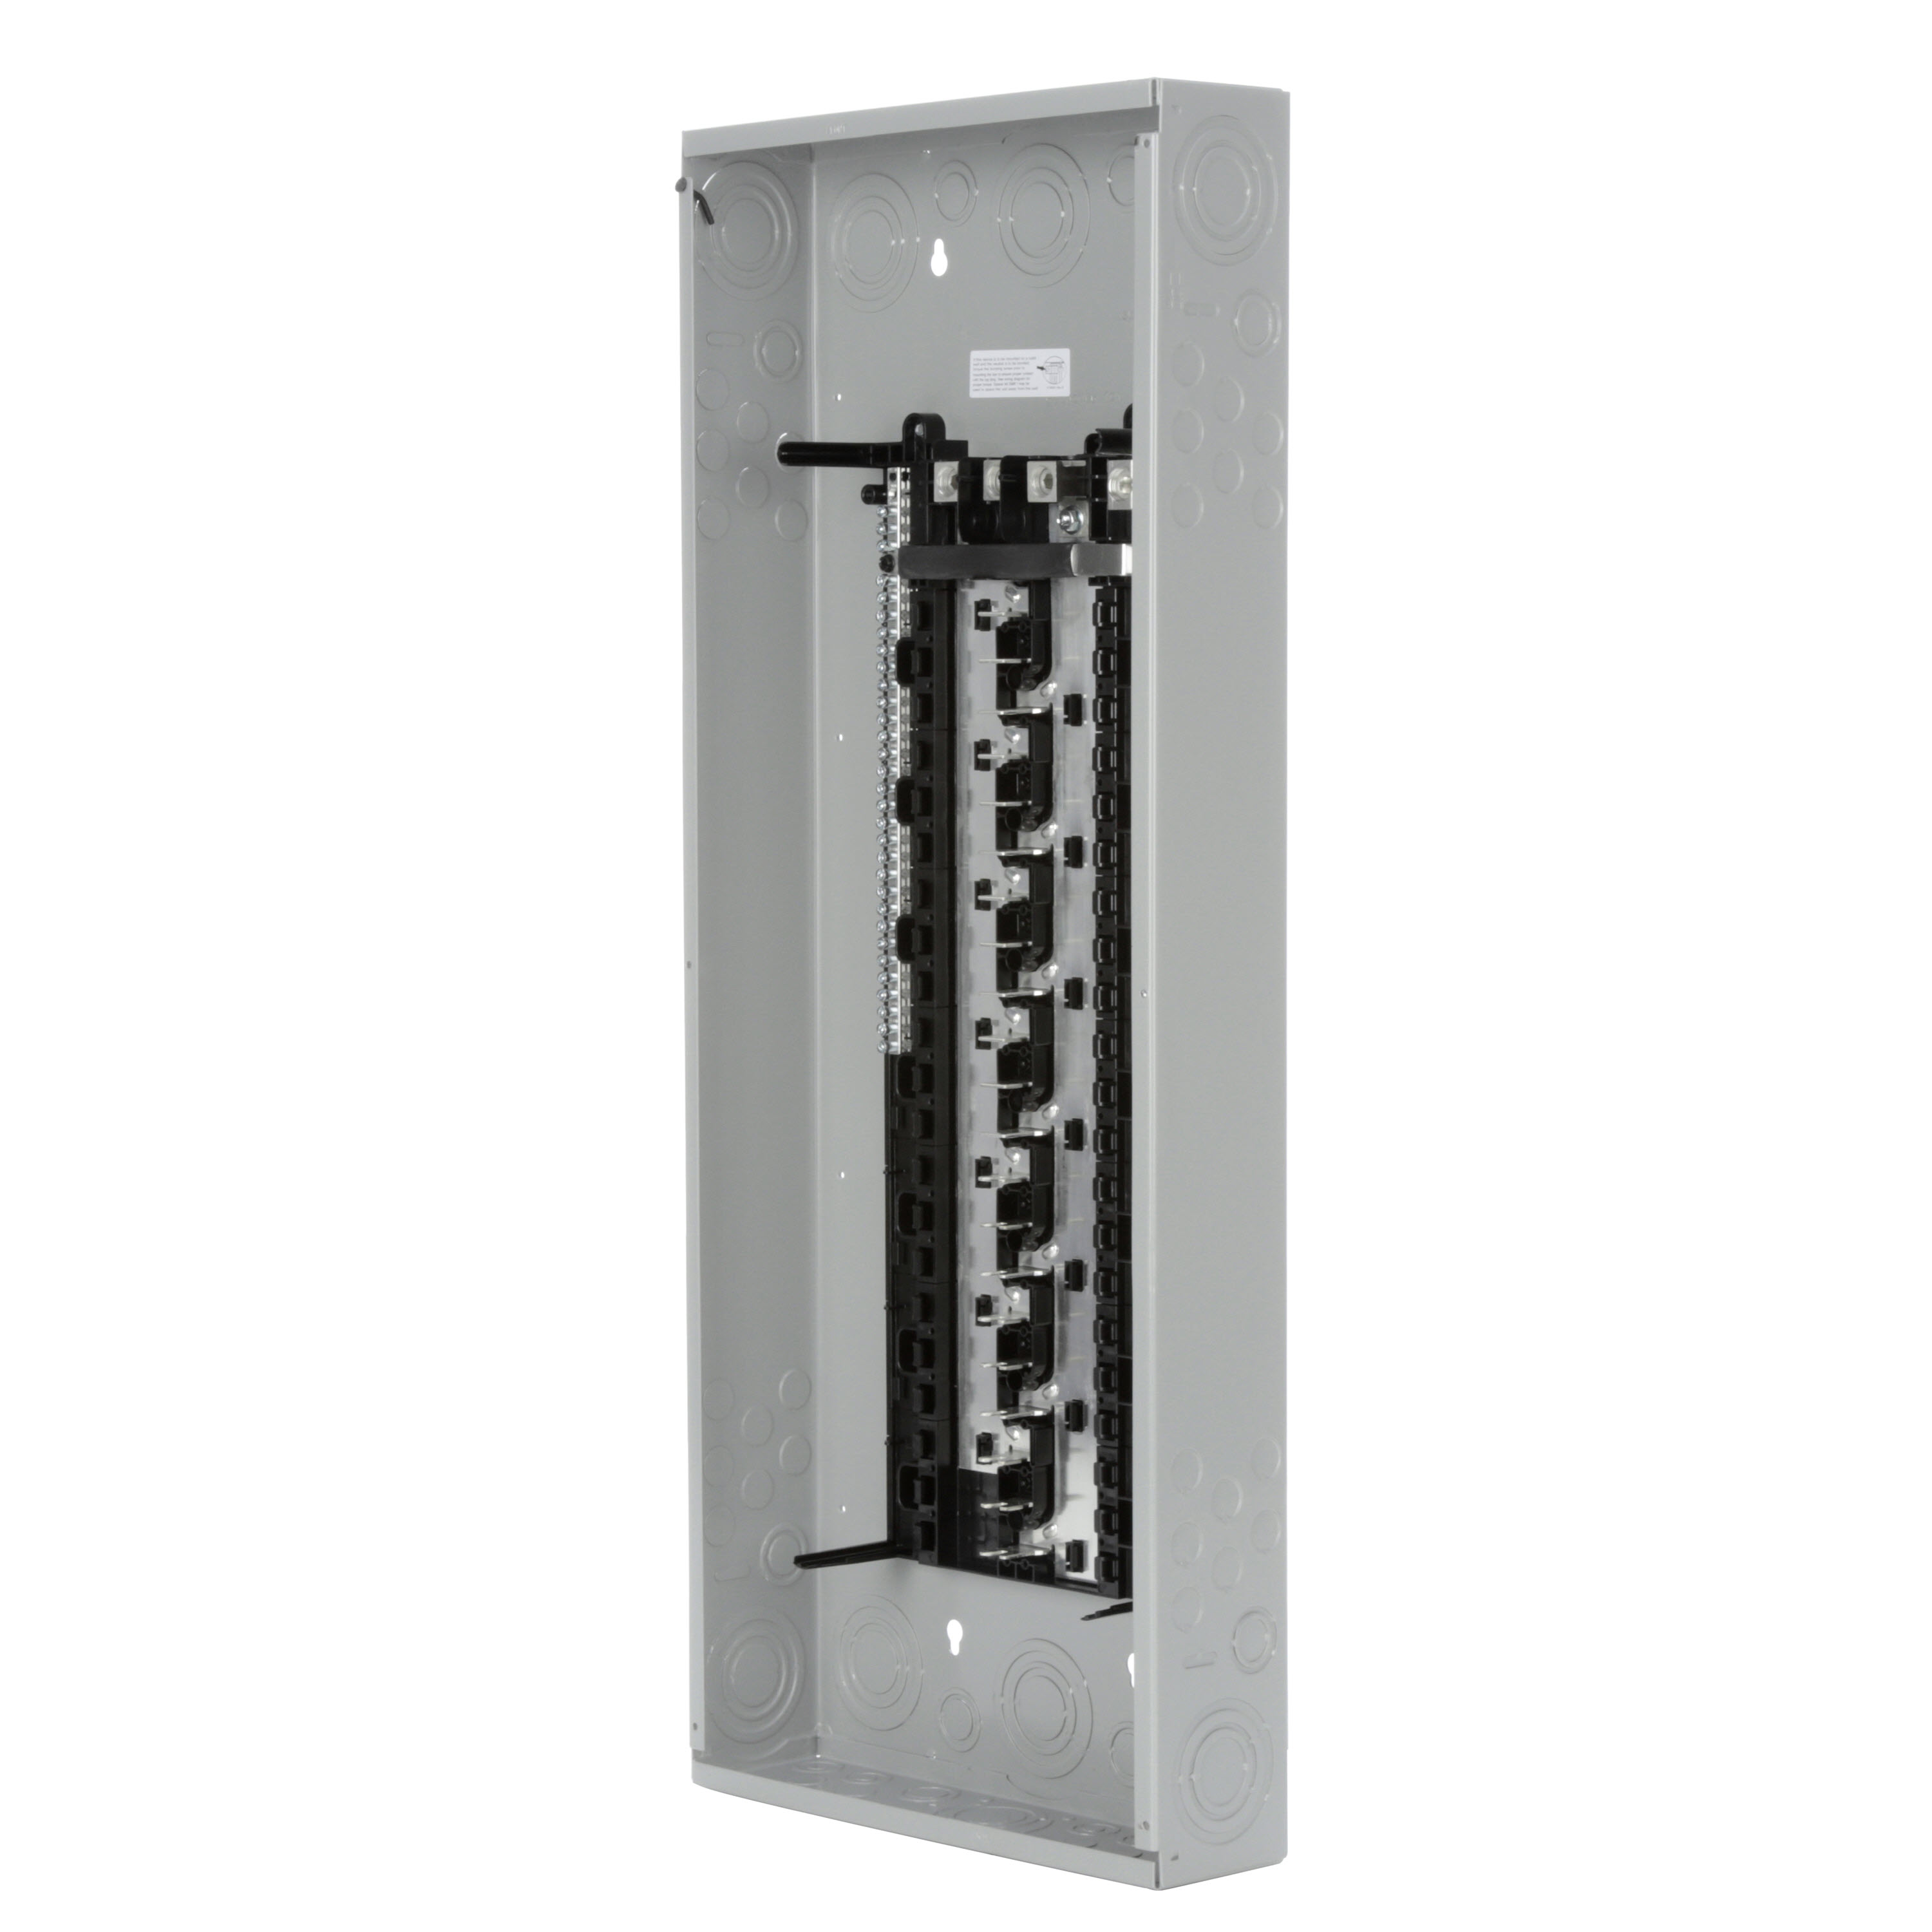 SIEMENS LOW VOLTAGE ES SERIES LOAD CENTER. MAIN LUG WITH 42 1-INCH SPACES ALLOWING MAX 60 CIRCUITS. 3-PHASE 4-WIRE SYSTEM RATED 120/240V OR 120/208V (225A) 100KA INTERRUPT. SPECIAL FEATURES ALUMINUM BUS, GRAY TRIM, NEMA TYPE1 ENCLOSURE FORINDOOR USE.